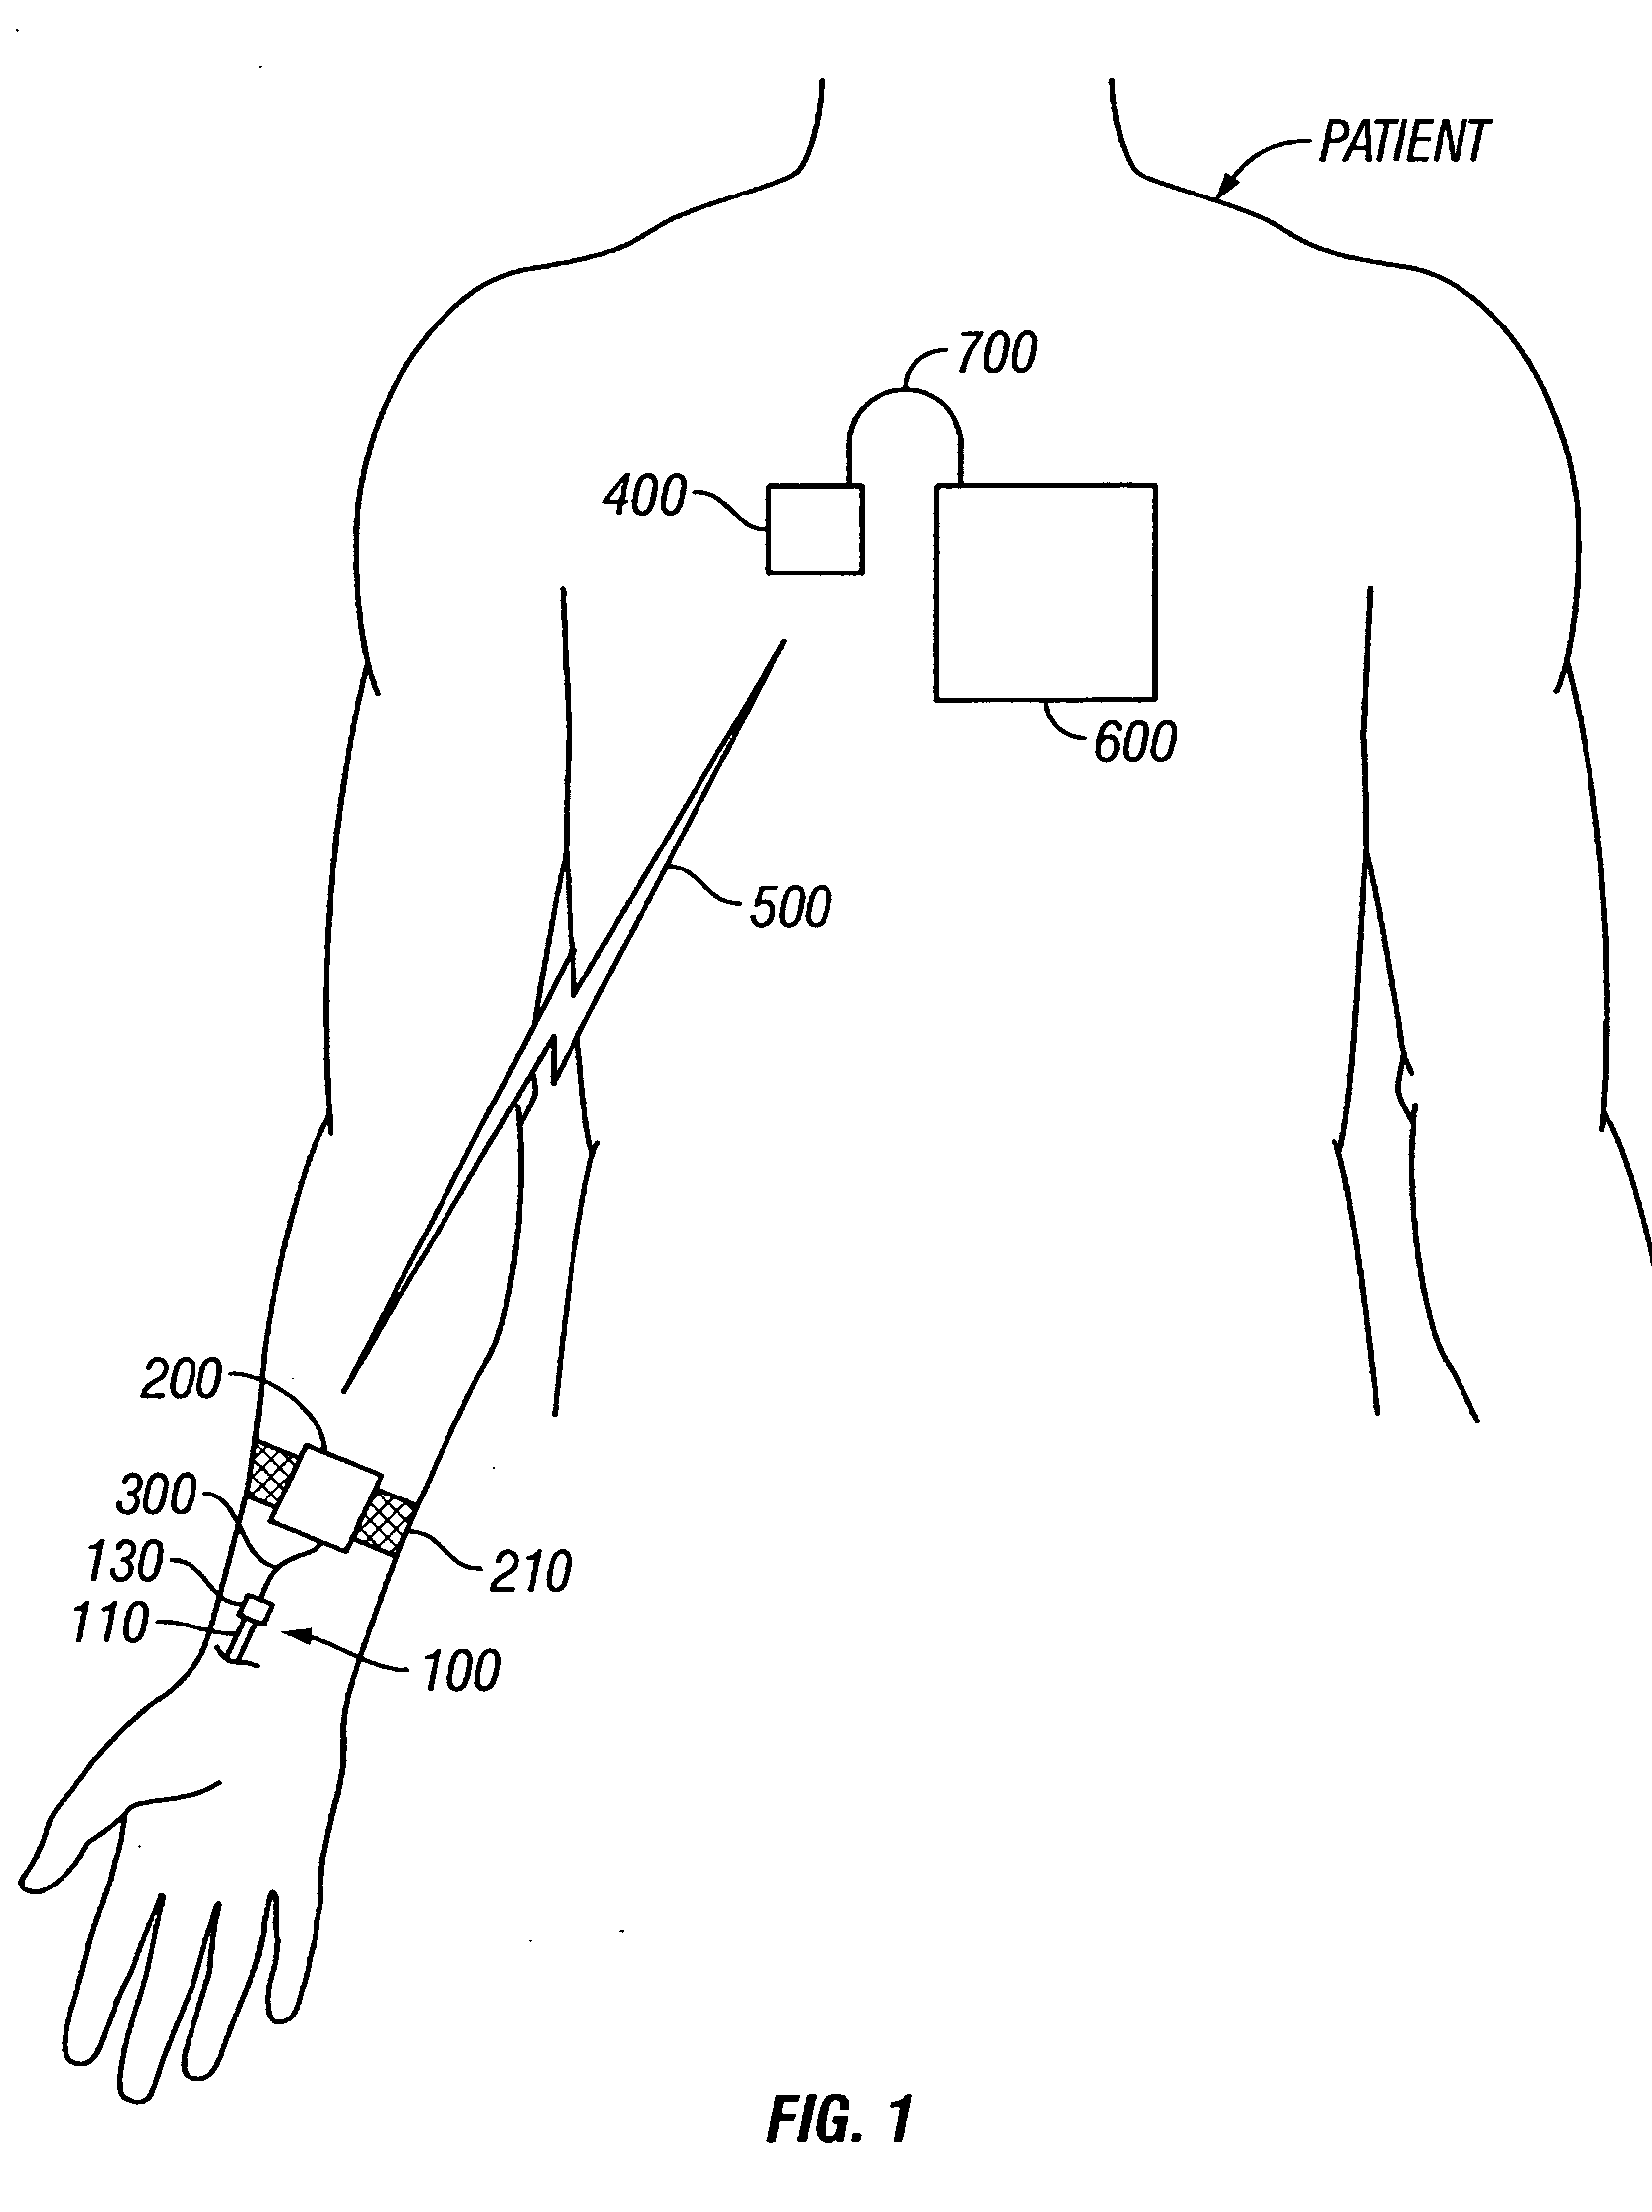 Vascular blood pressure monitoring system with transdermal catheter and telemetry capability